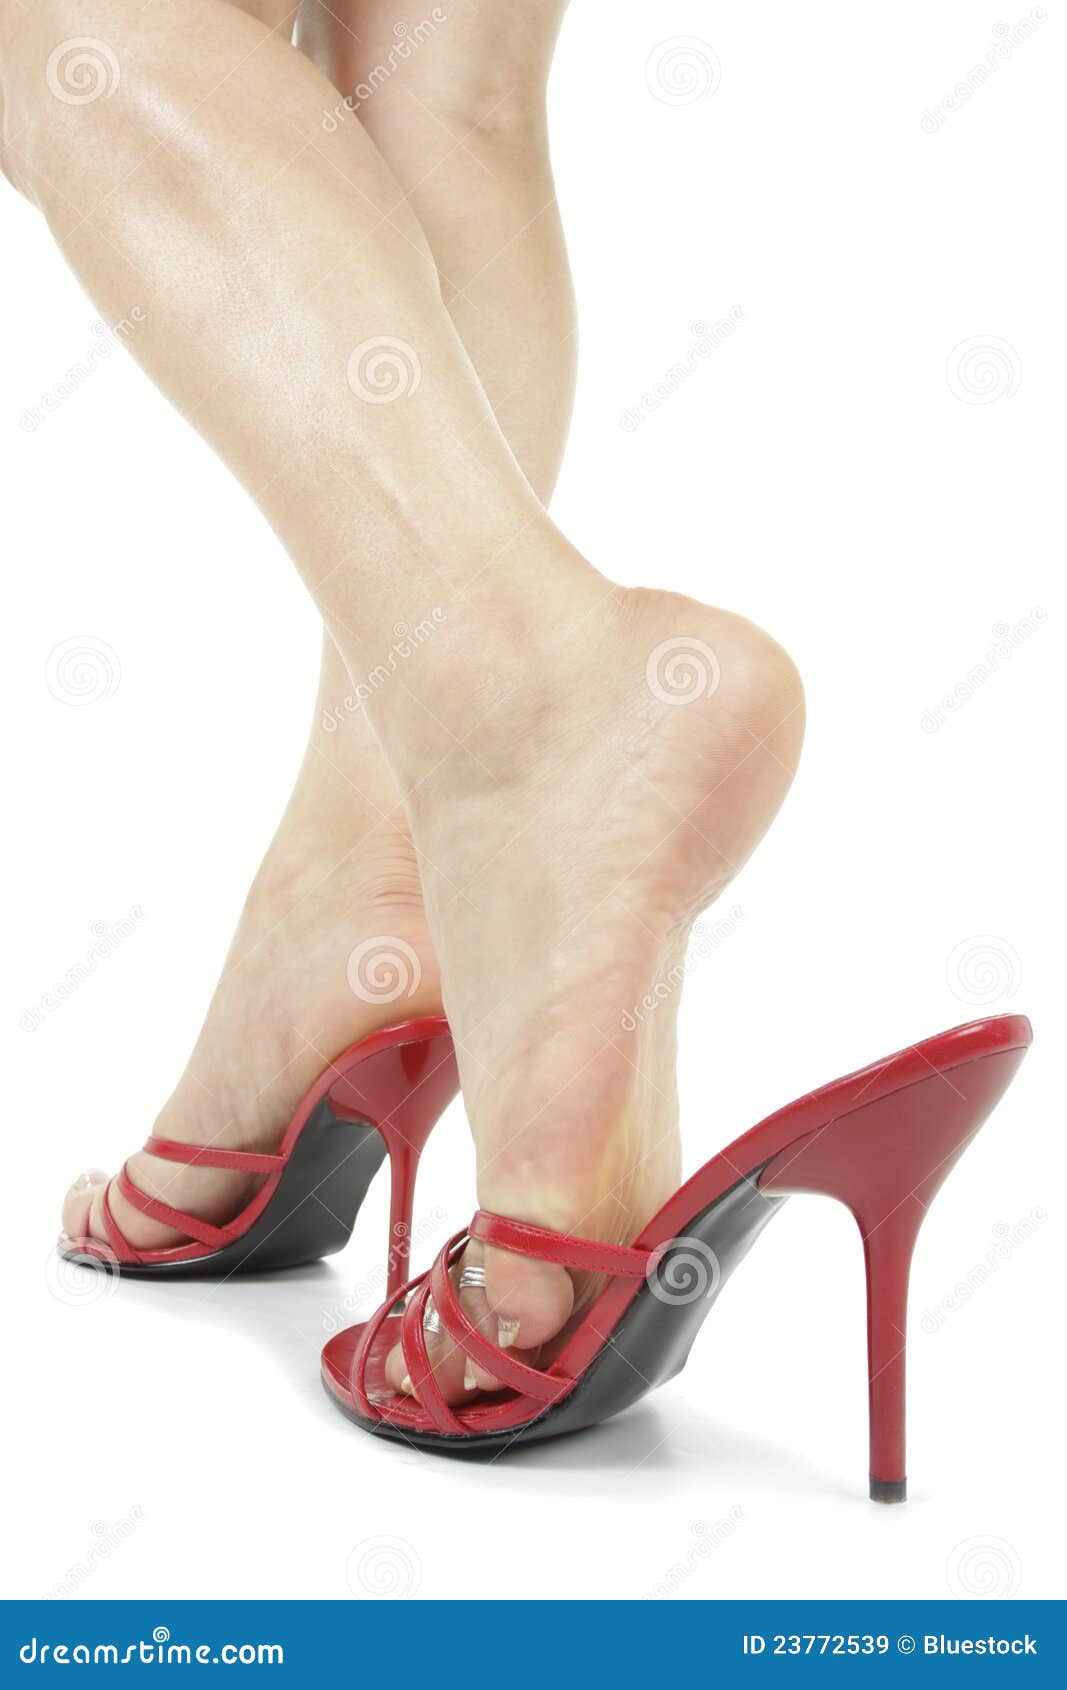 Woman Feet Wearing Heel Shoes Over White Stock Image - Image of ...